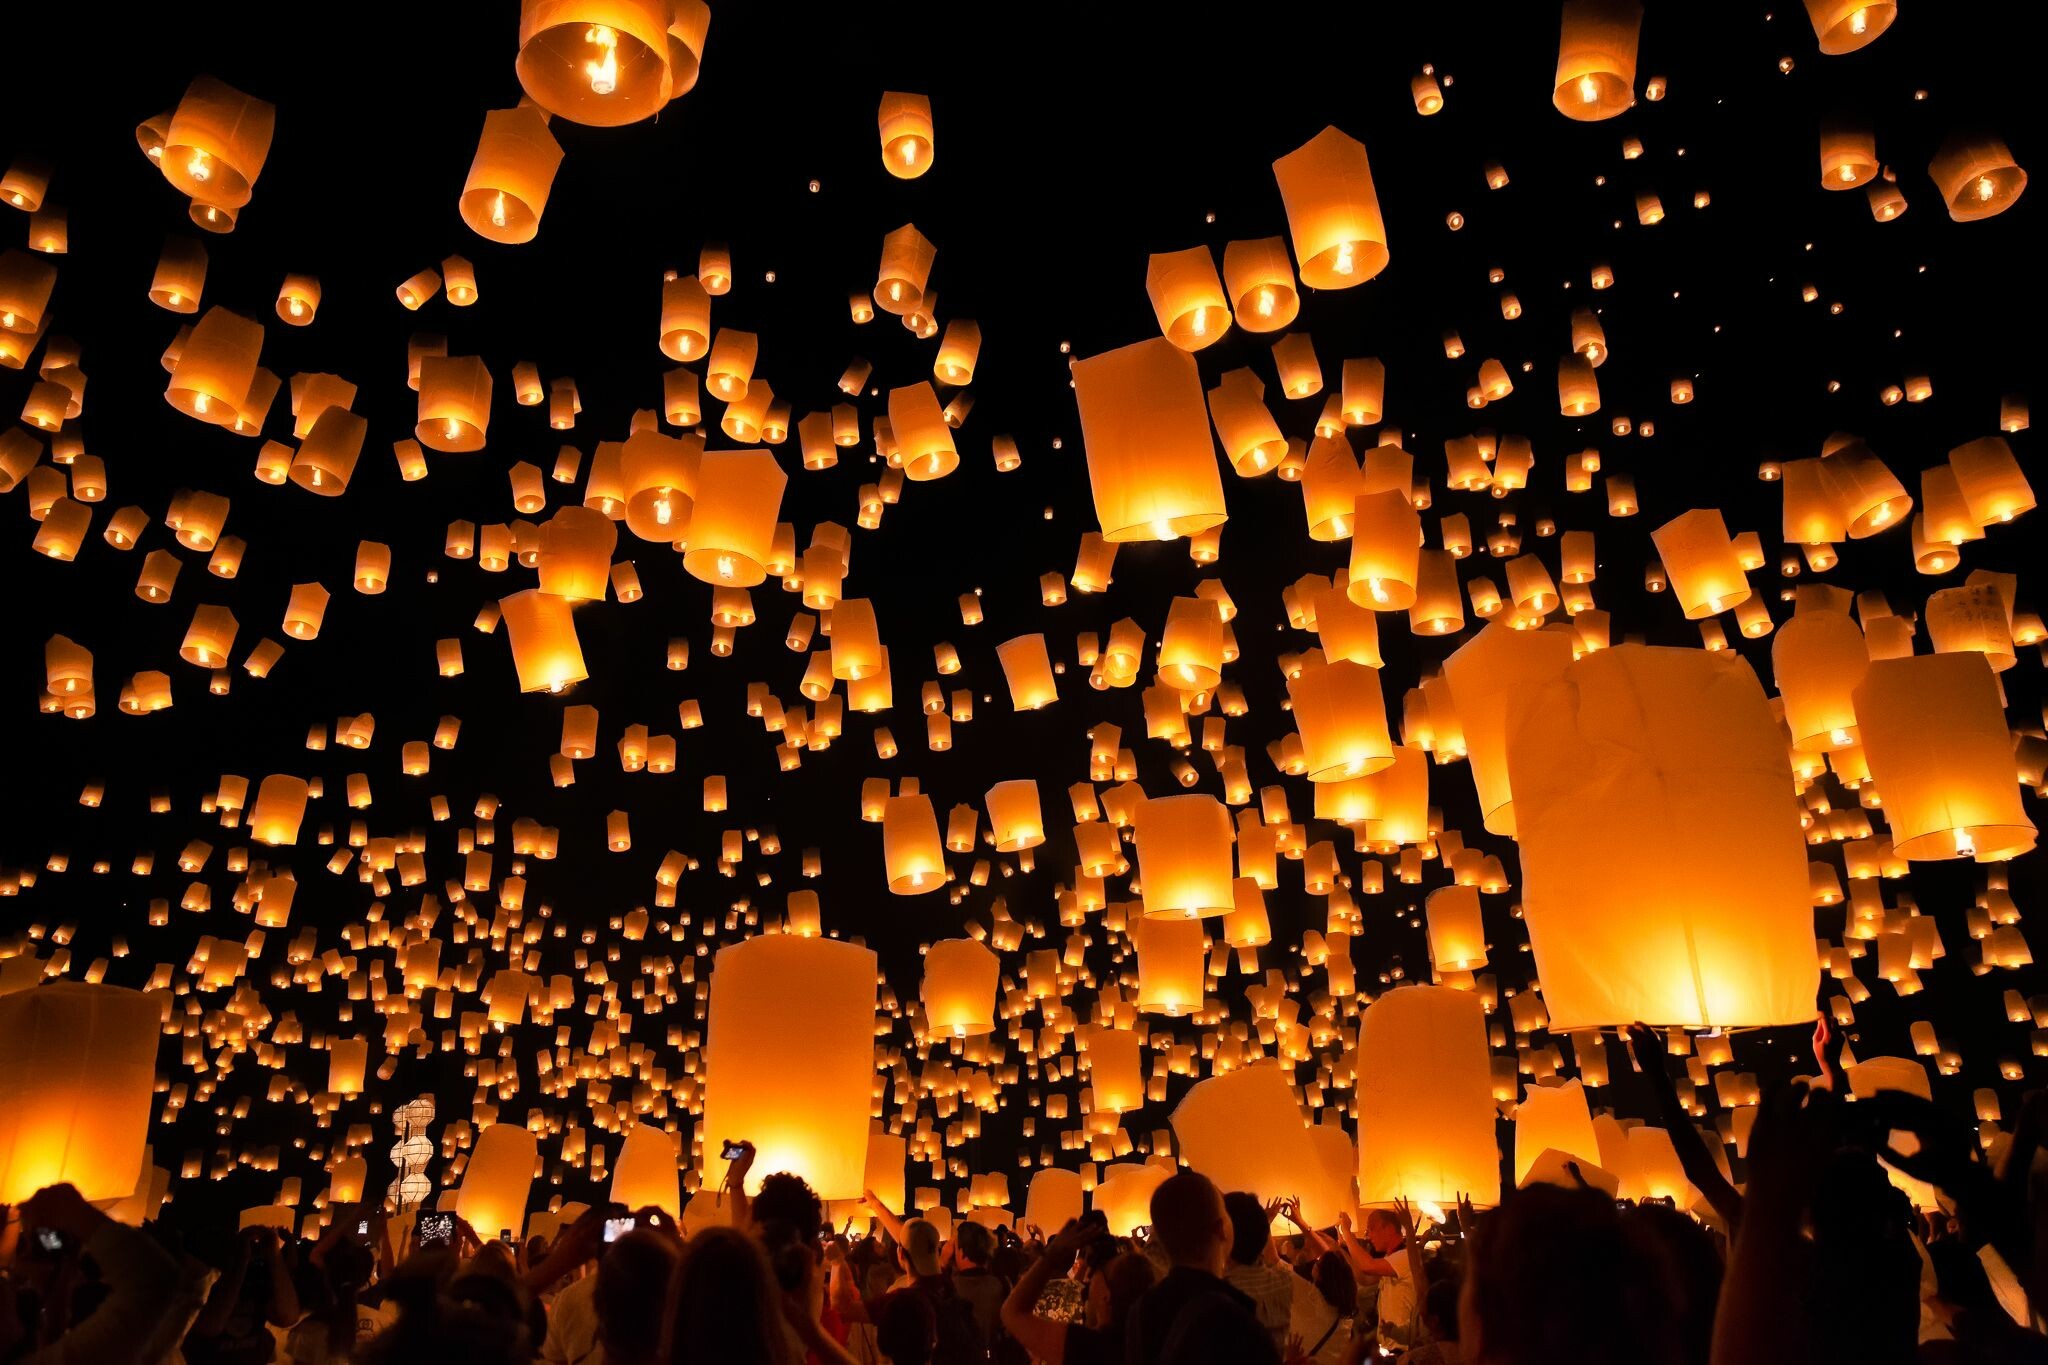 Lantern Festival: Mass launching of small hot air balloons made of paper, Celebration. 2050x1370 HD Wallpaper.